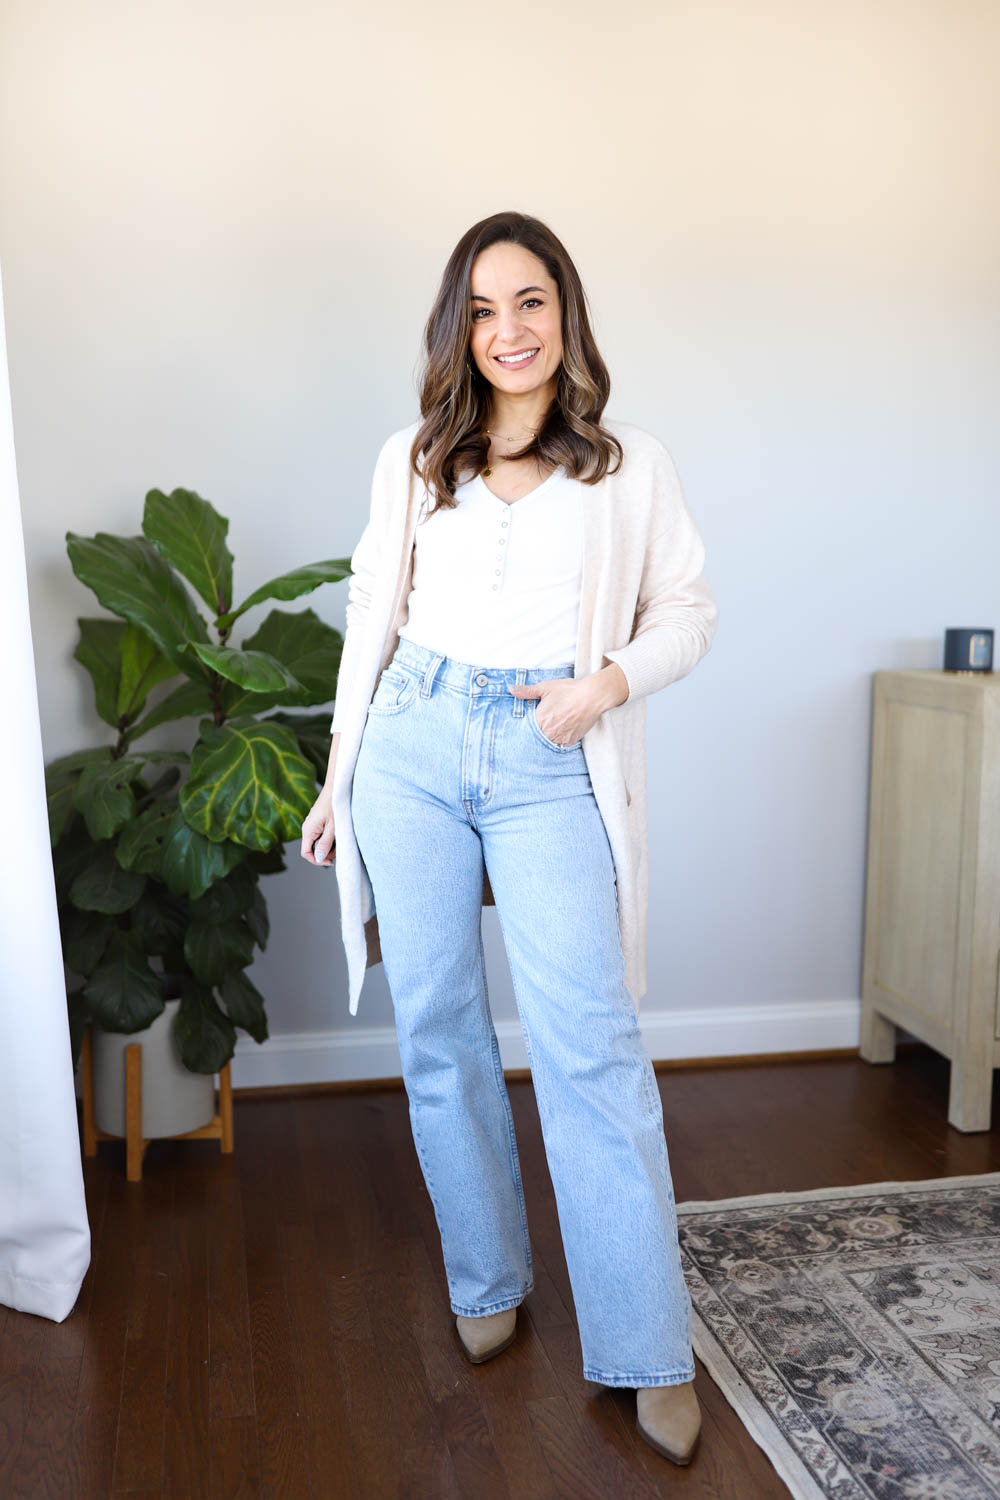 Wide-Leg Jeans And The Petite Girl